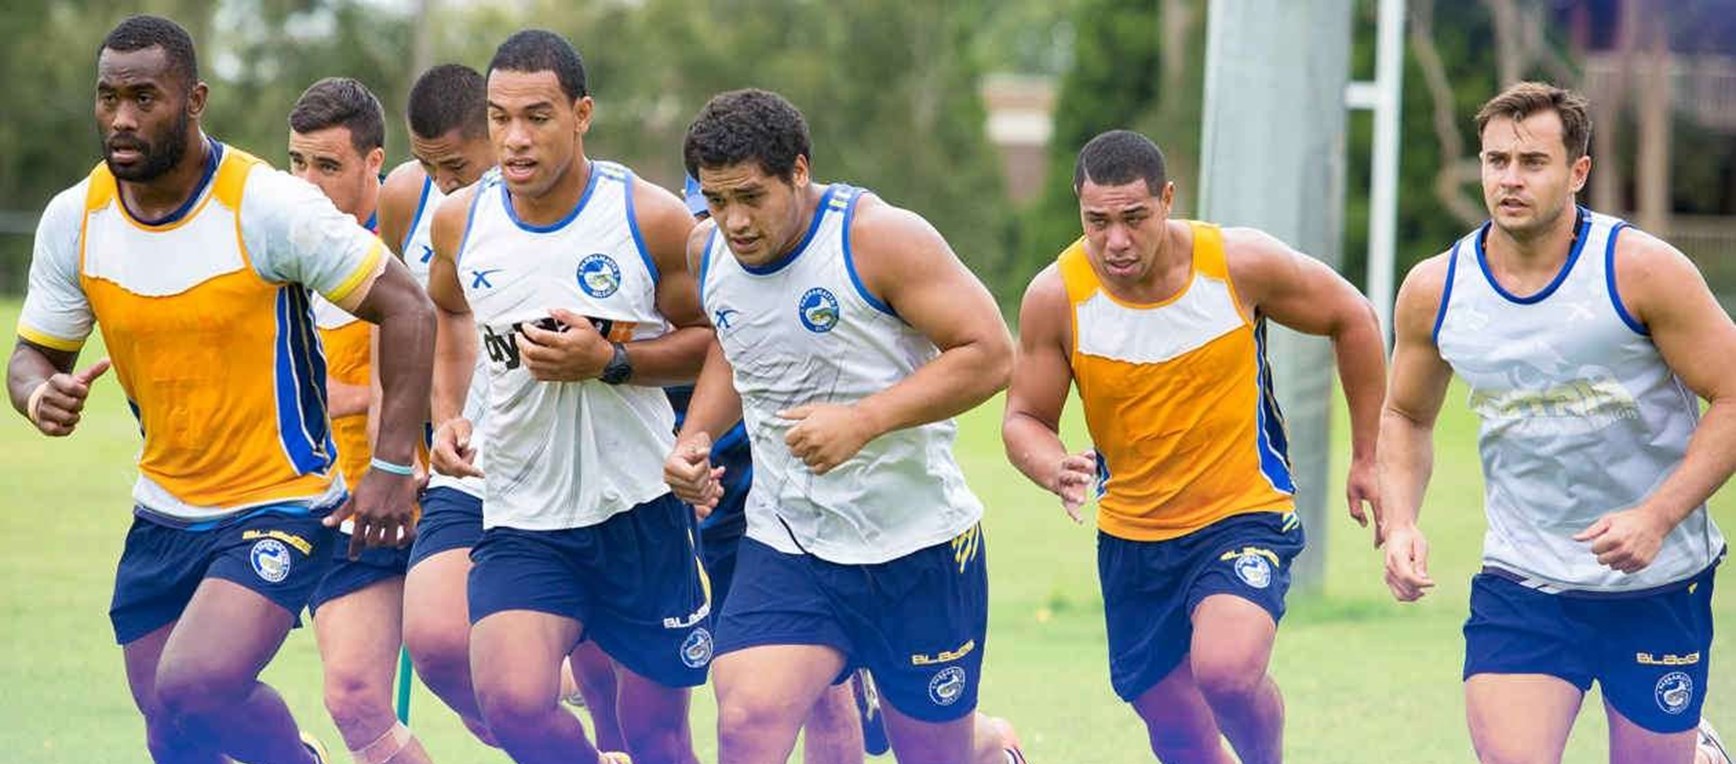 GALLERY: Returning to training in 2014